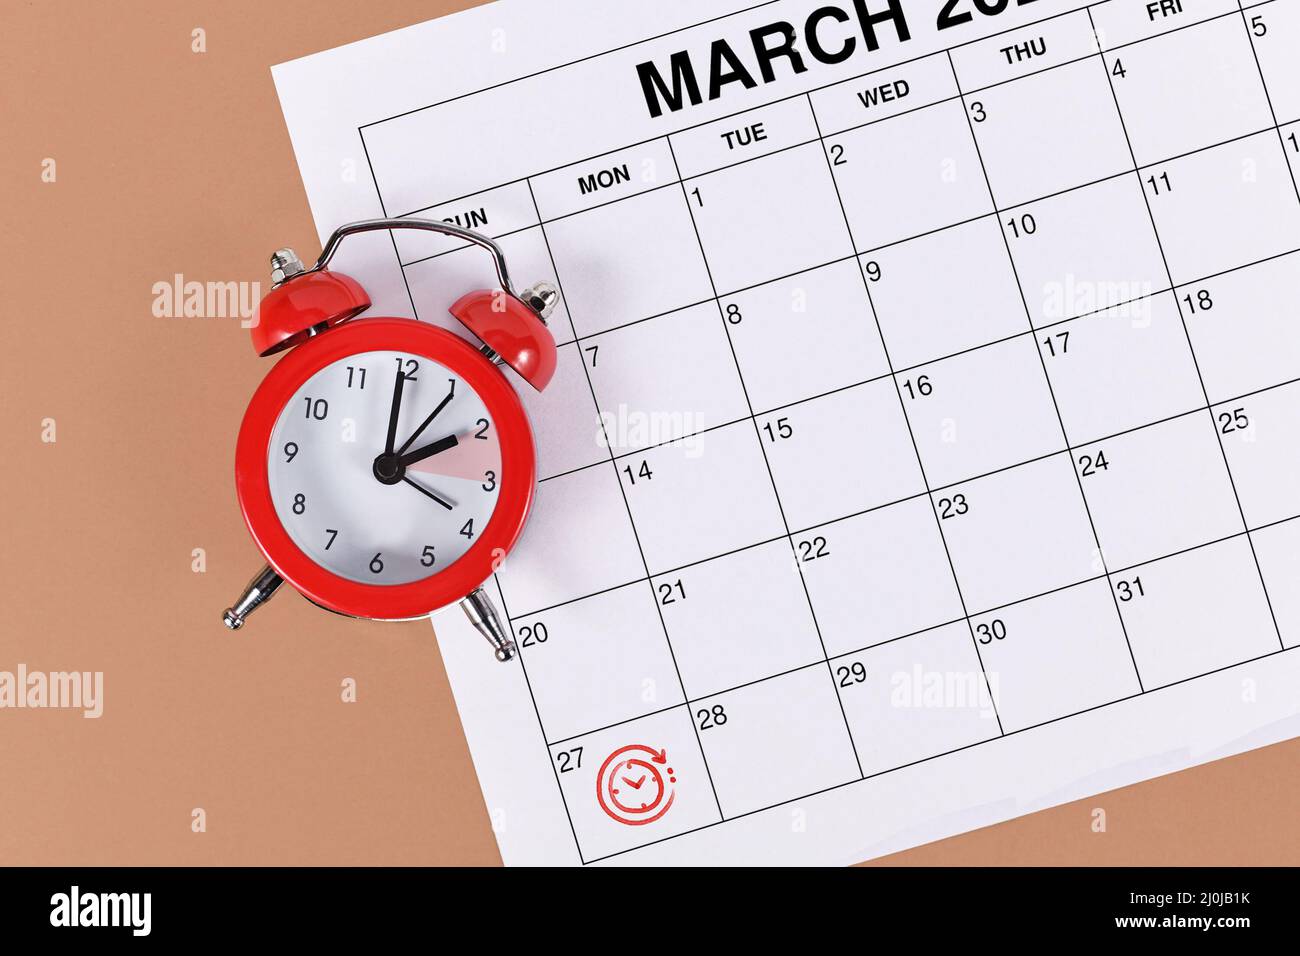 Concept for time change for Central European Summer Time on March 27th with red alarm clock and calendar sheet Stock Photo